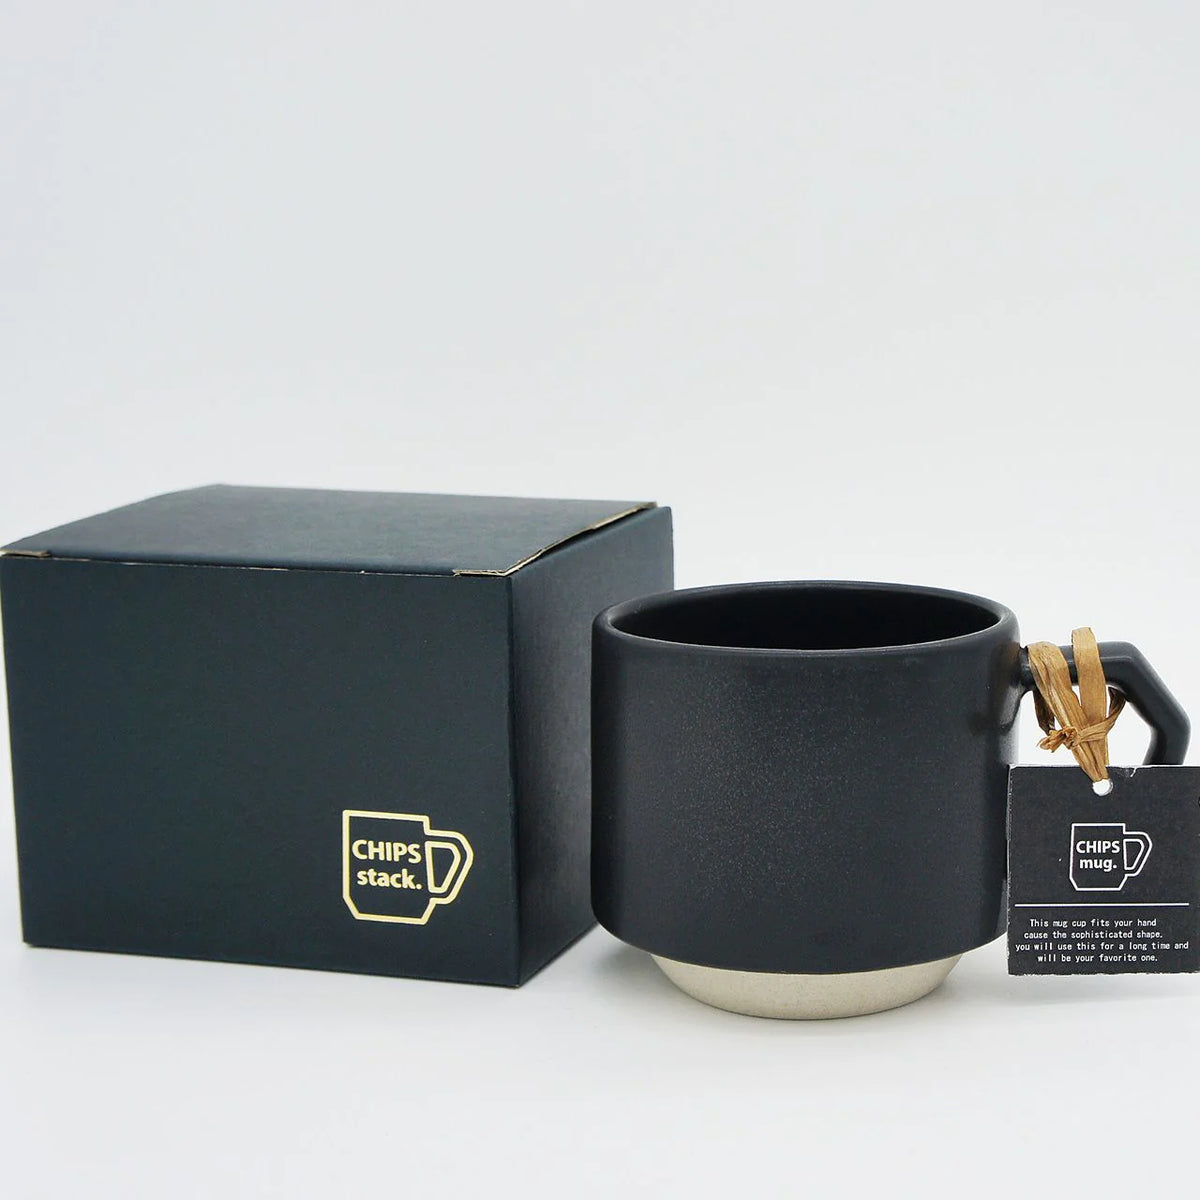 A CHIPS Inc. stackable black coffee mug with a tag and box: the Stacking Mug – Black.